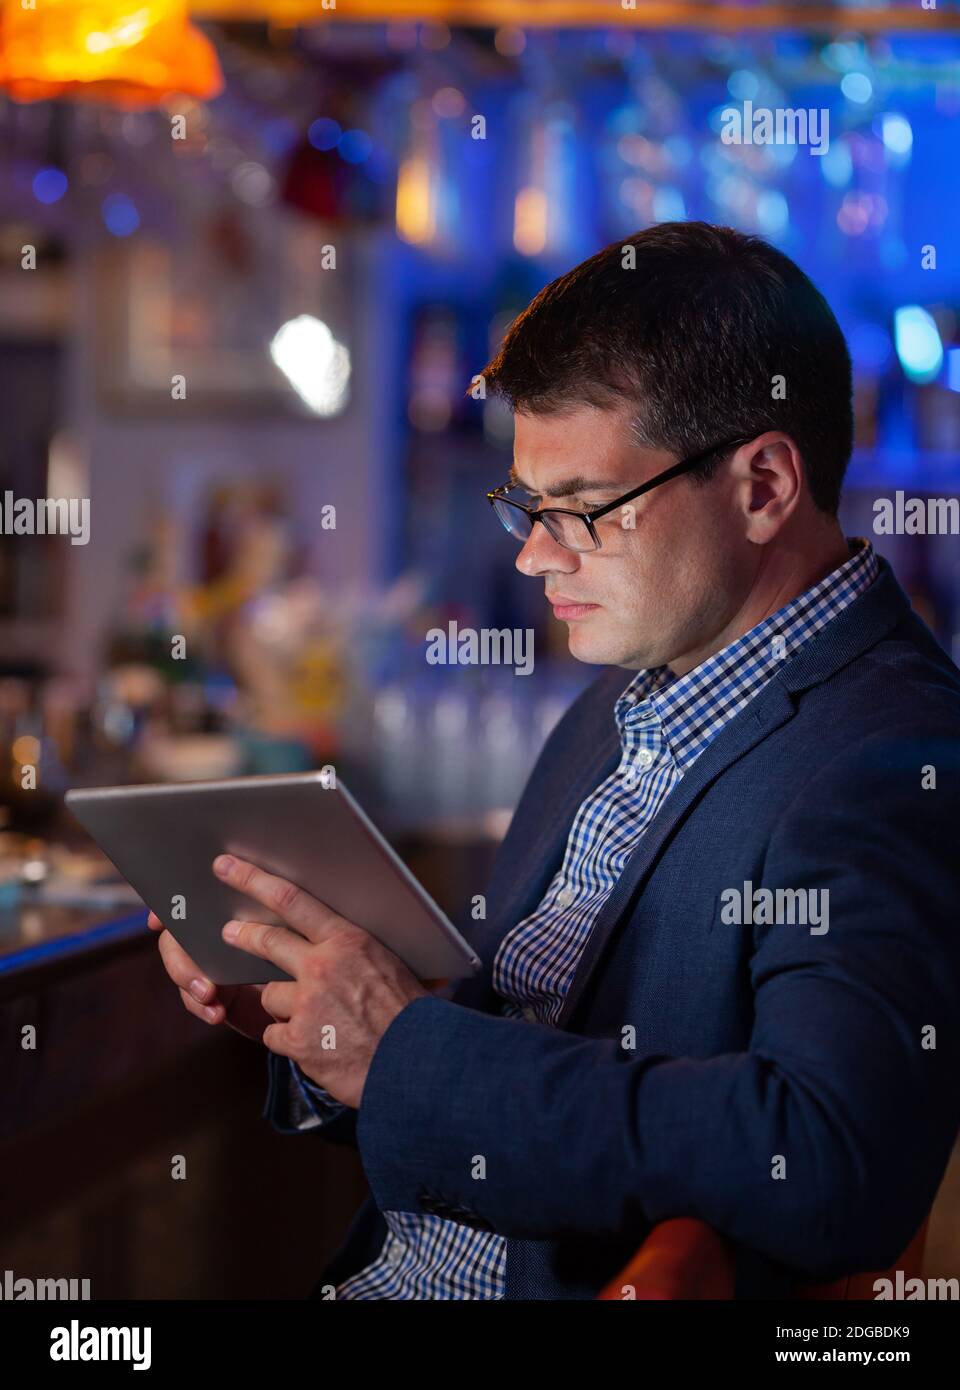 He cannot get away from his job even in the bar Stock Photo